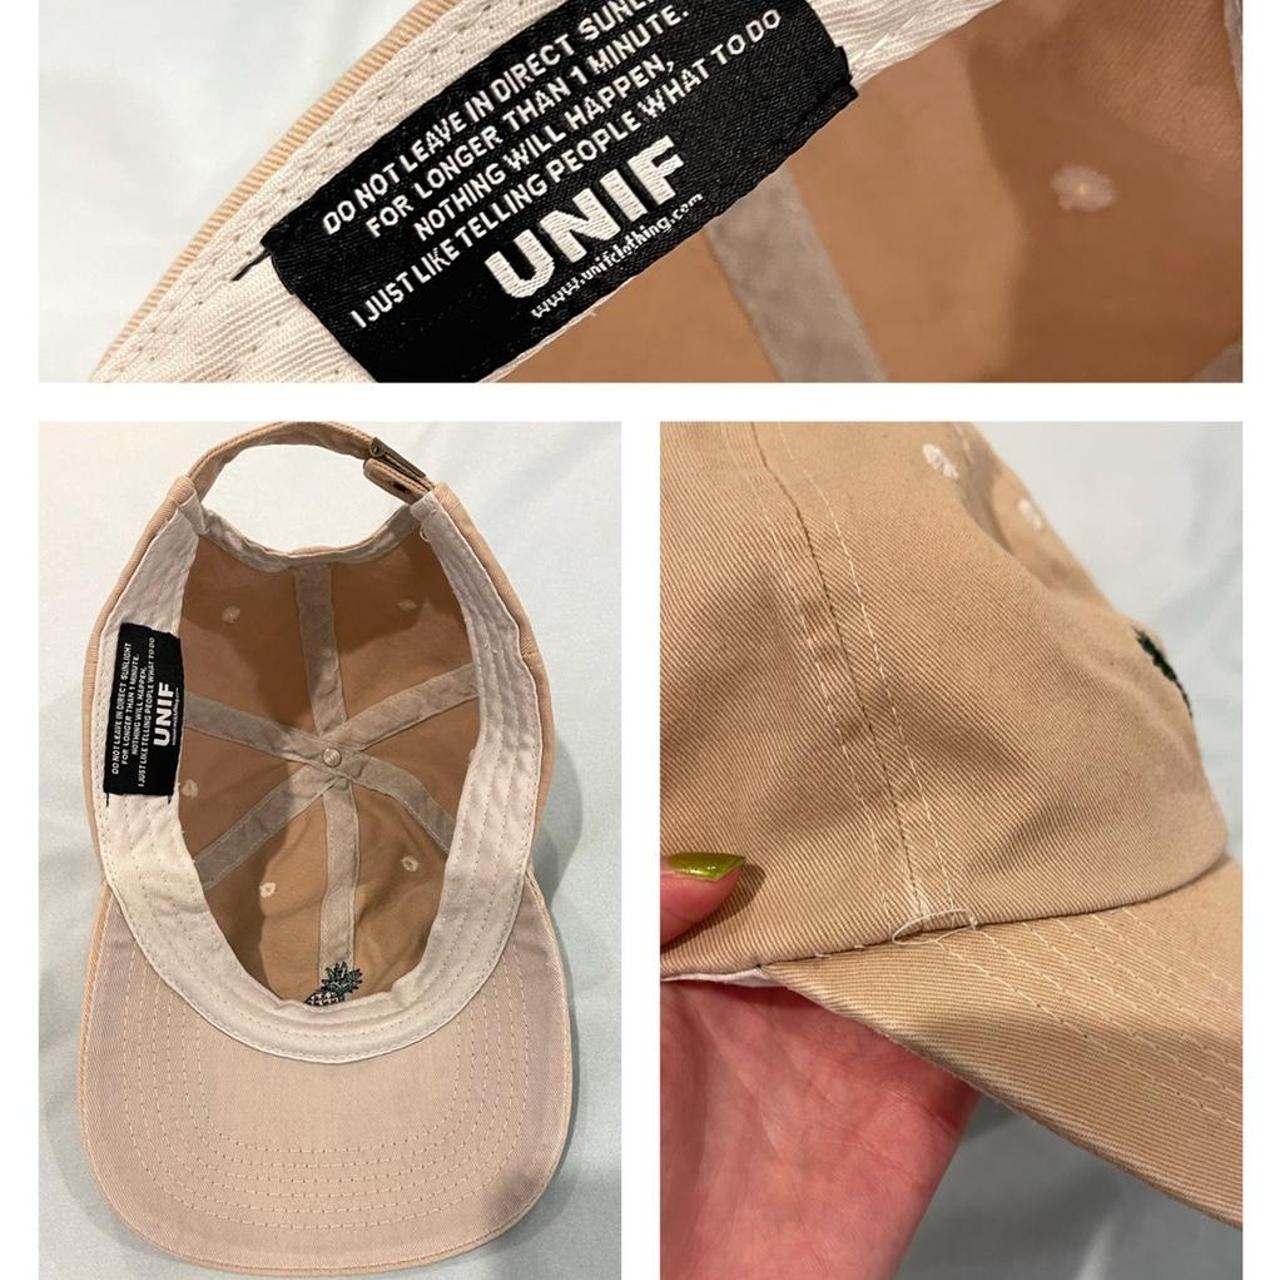 Product Image 4 - unif pineapple hat 🍍
beige tan